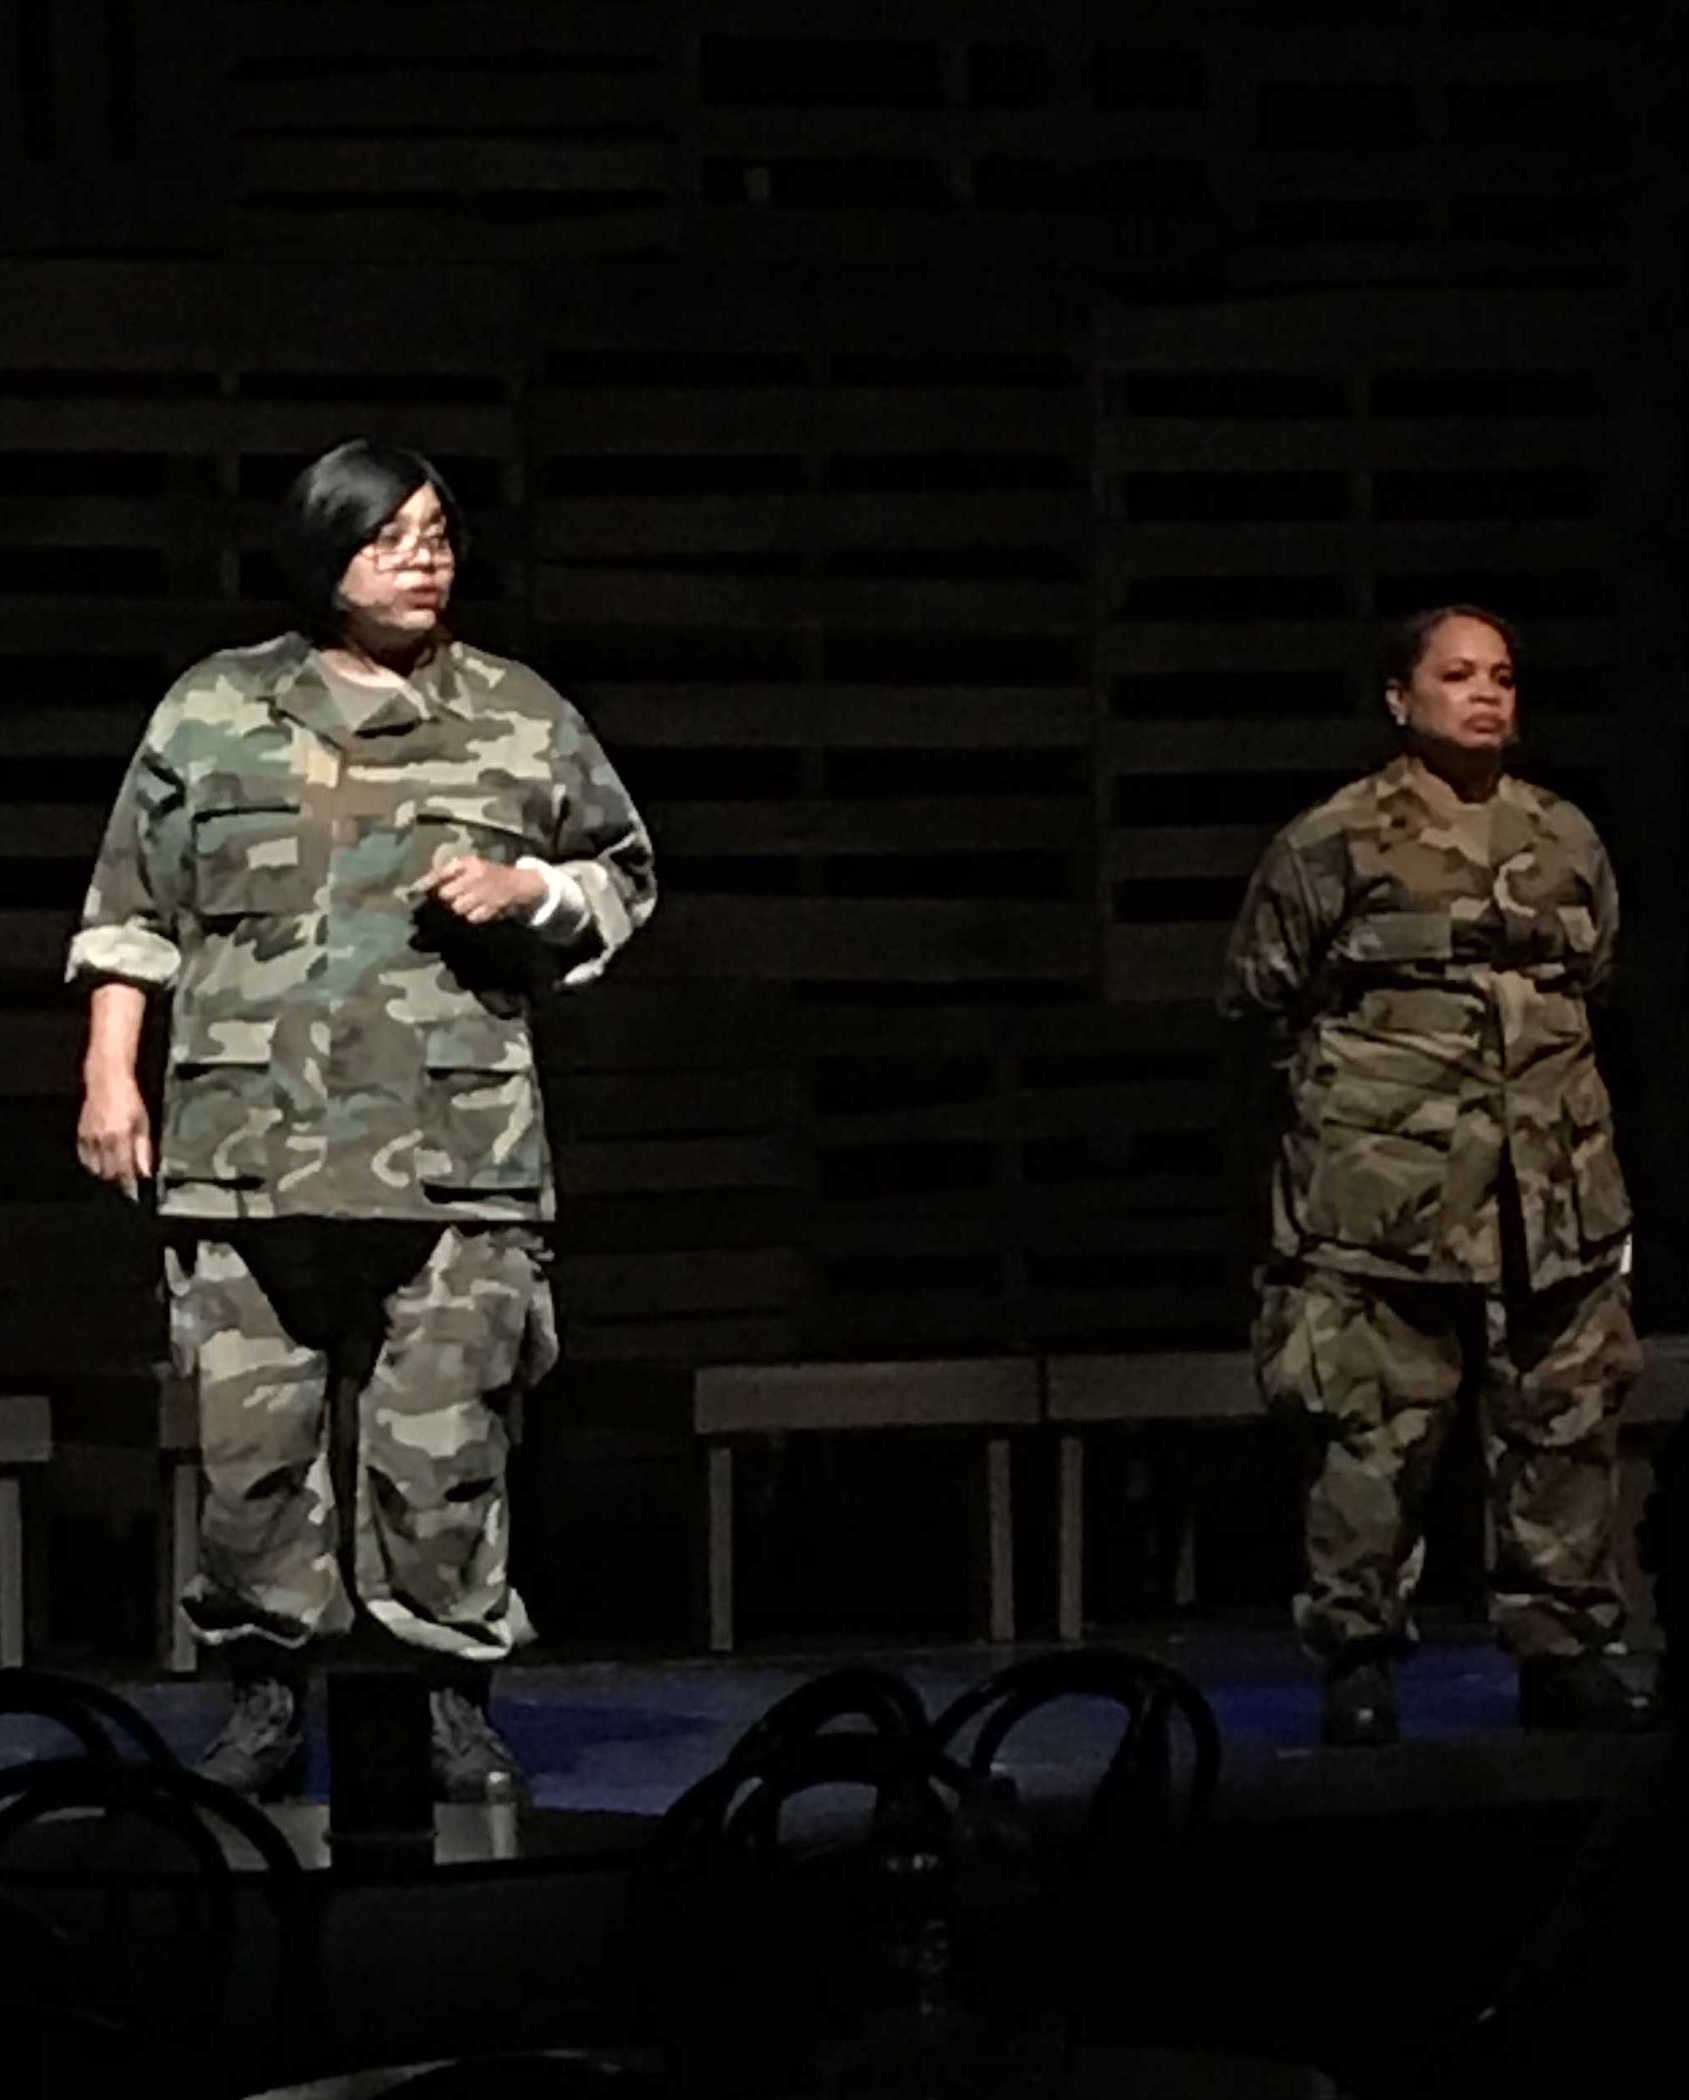 (L-R) Irene Cruz and Carla Brame Wilkerson  in a performance of Marching On at The Wallis.  PHOTO CREDIT: Nate Albus